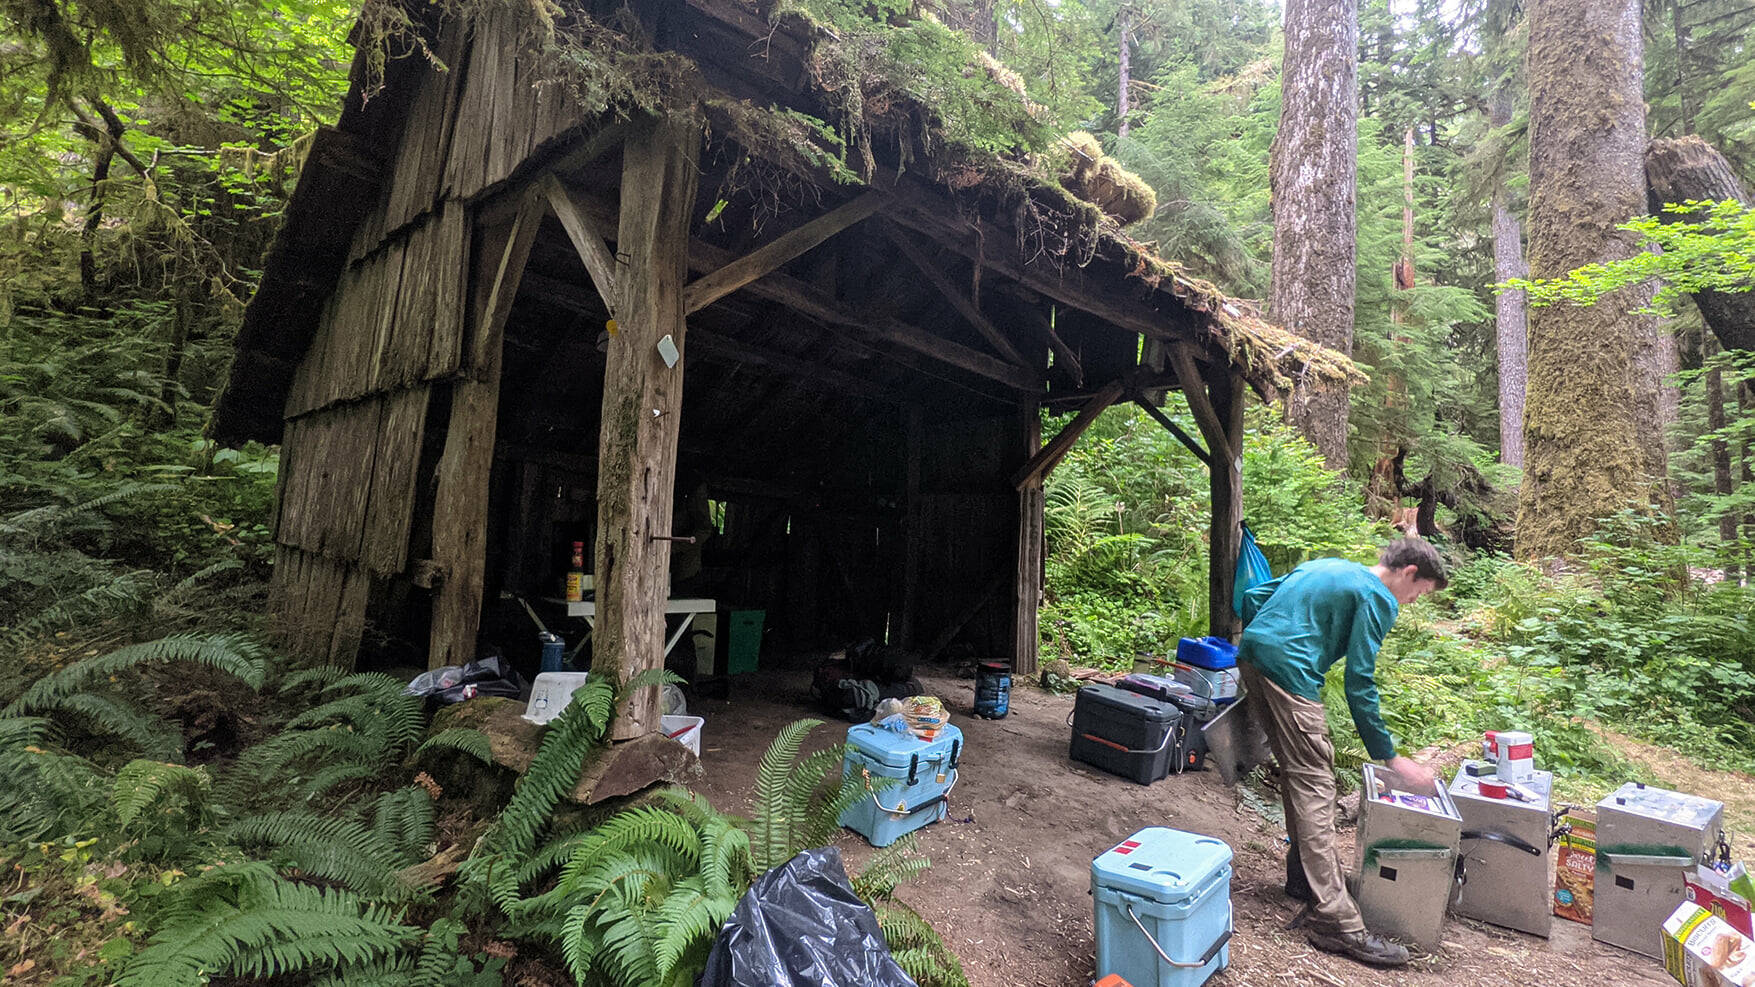 PNTA crew members stage equipment dropped off by volunteer packers at the Fifteen Mile Shelter along the PNT in Olympic National Park.